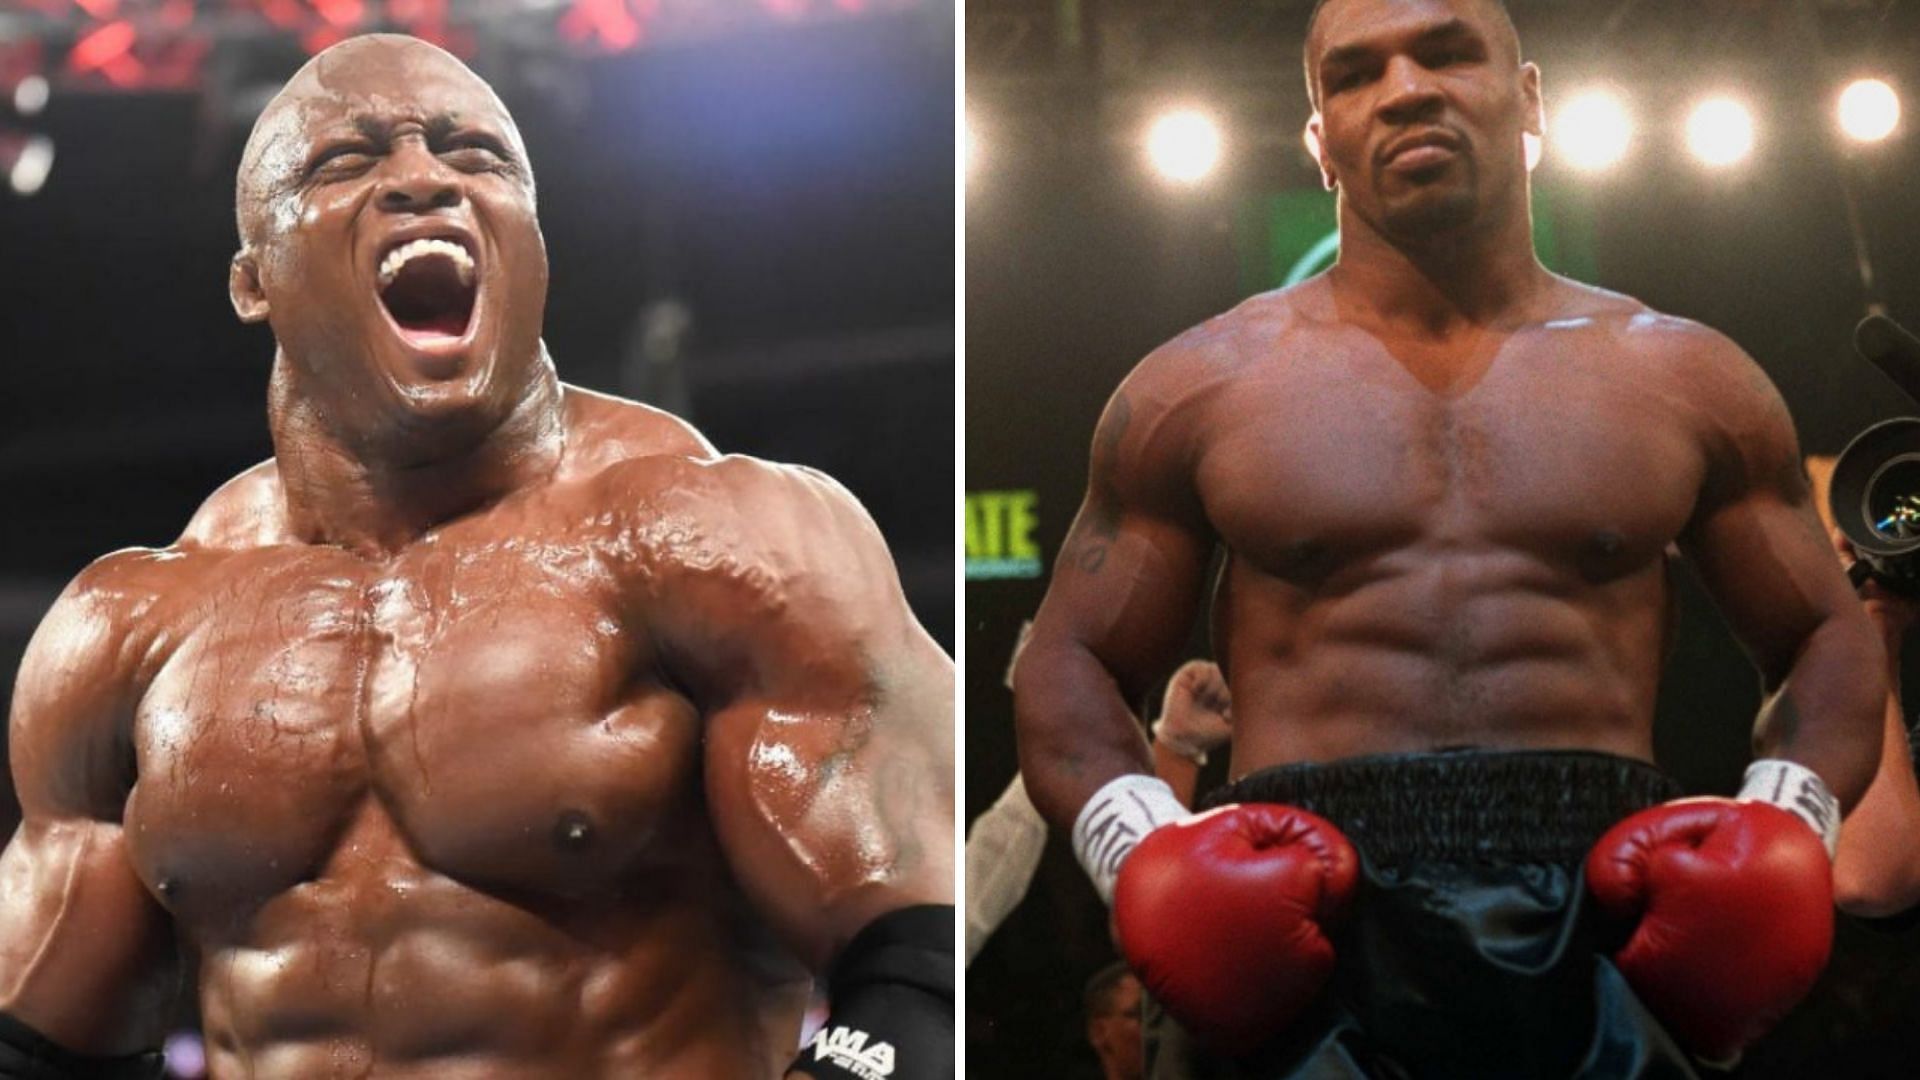 Bobby Lashley has never competed in a professional boxing match